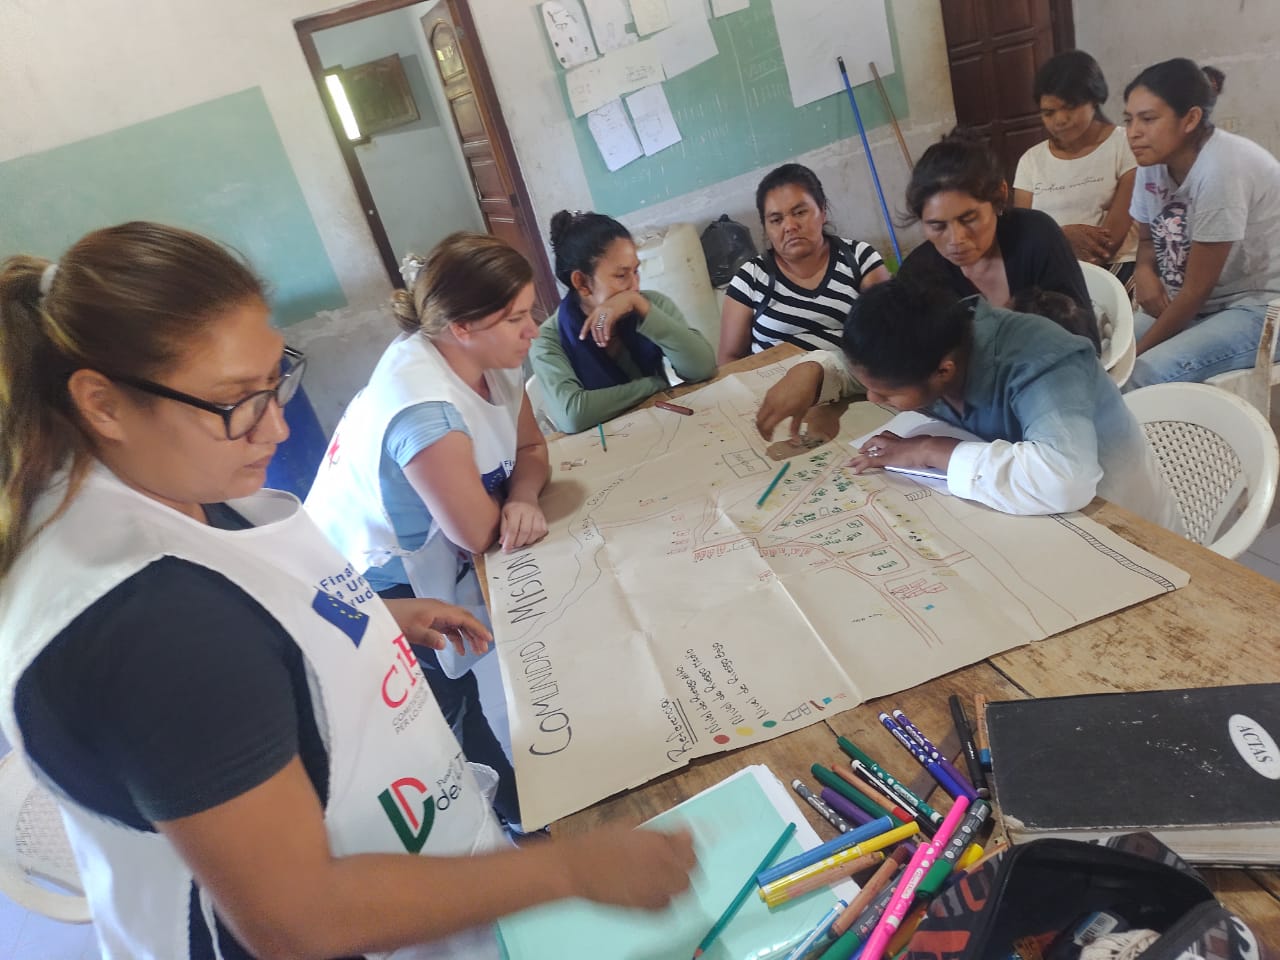 Indigenous communities, working in Community Emergency Operational Committees (CEOCs), prepare risk maps, action protocols and community plans that embody the principles of Sphere’s Humanitarian Charter and Protection Principles, and adapt Sphere’s Minimum Standards to their context, capacity and culture.